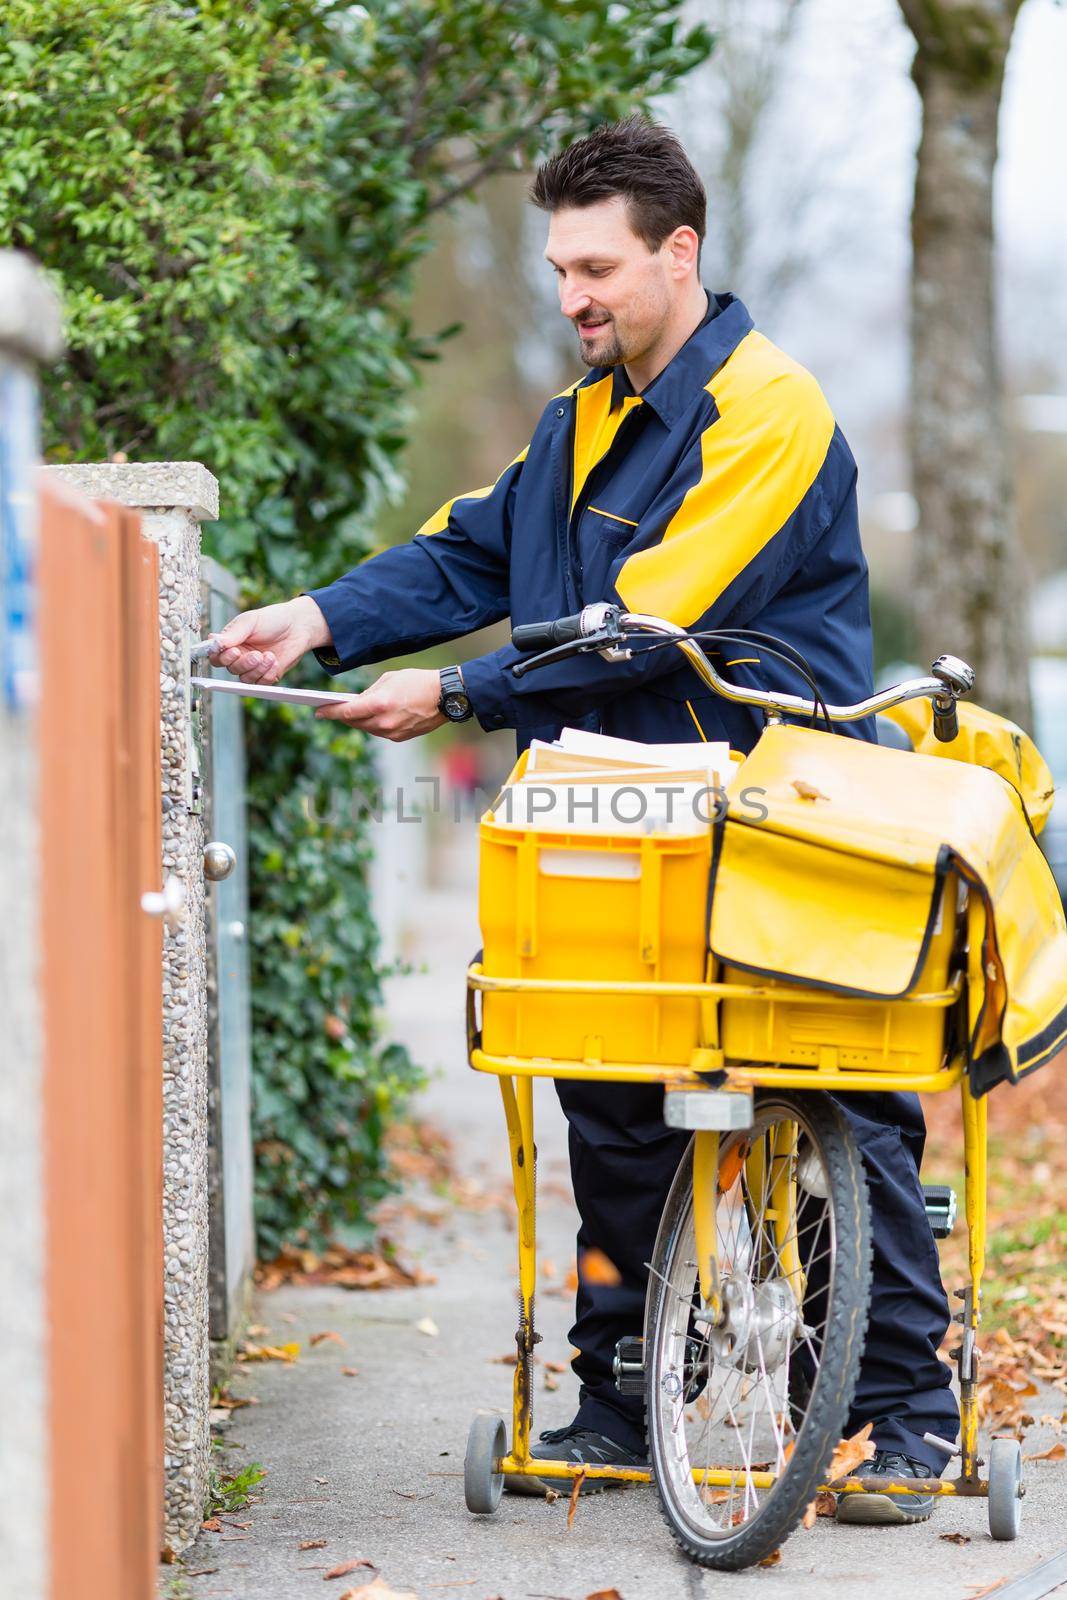 Postman delivering letters to mailbox of recipient